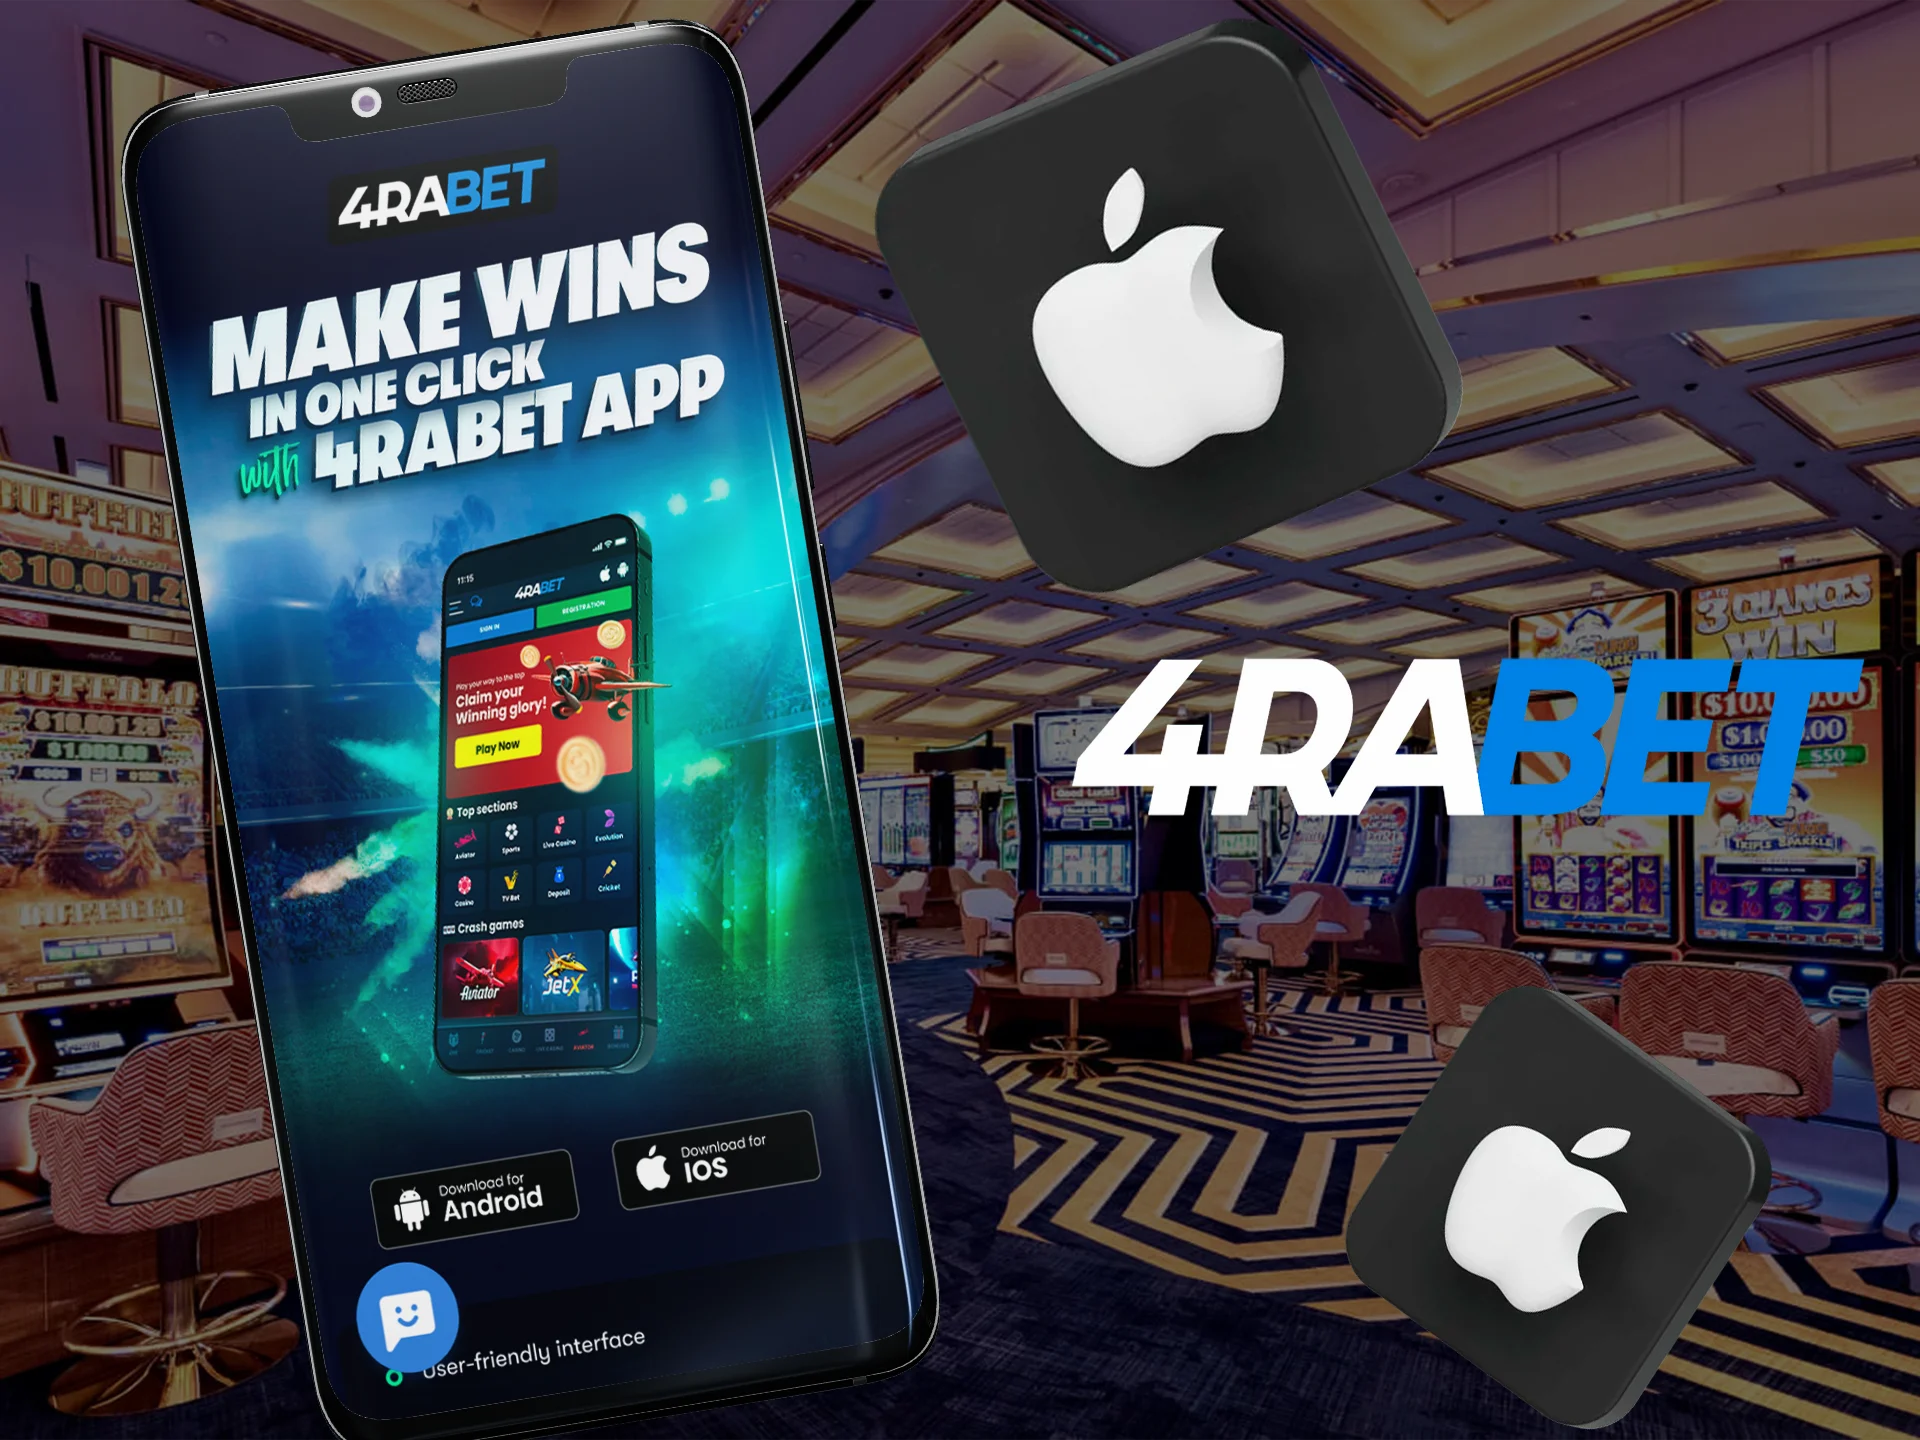 Install and use the application developed by the bookmaker 4Rabet for iOS device users.